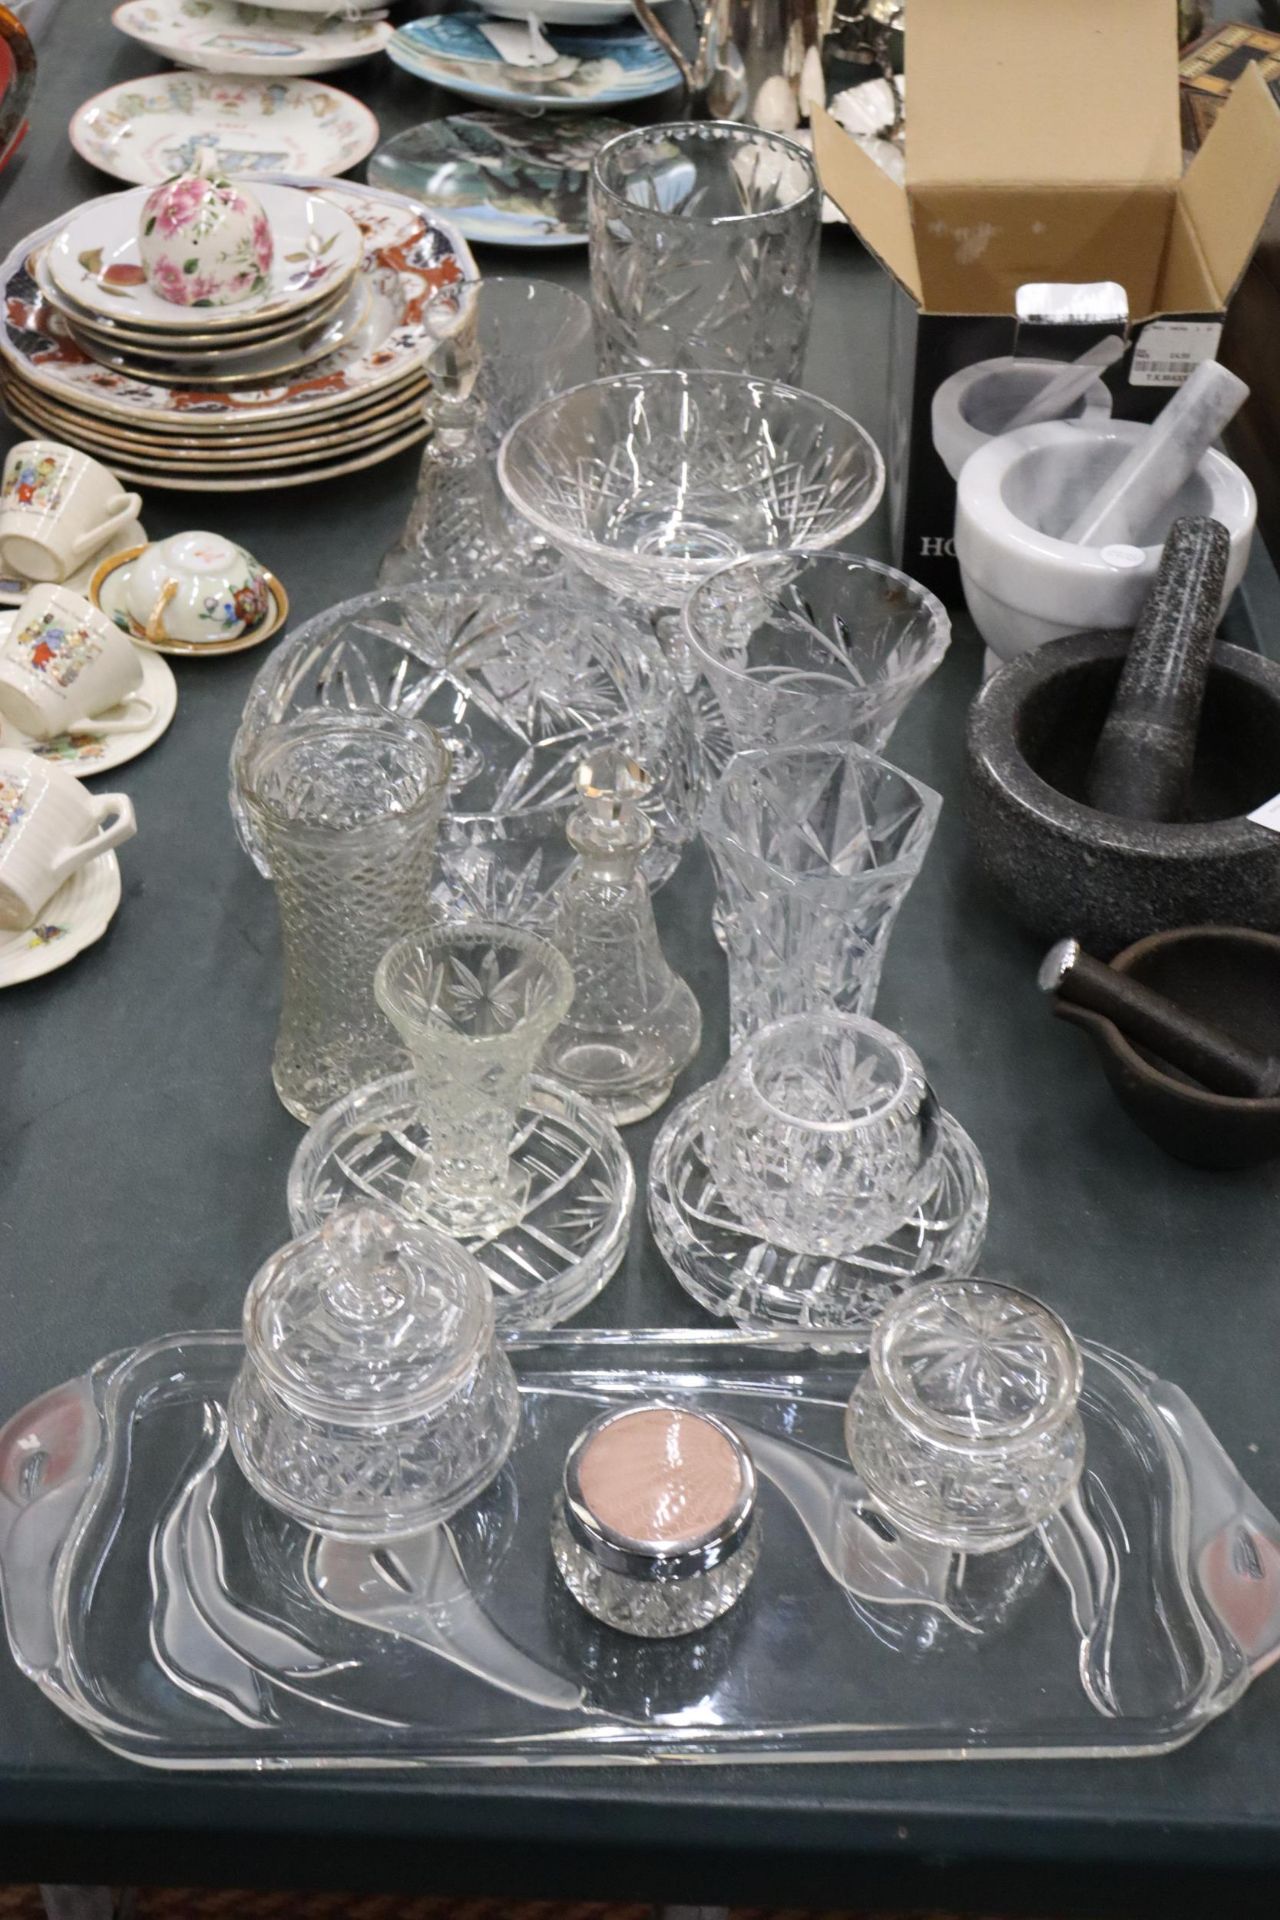 A LARGE QUANTITY OF GLASSWARE TO INCLUDE CUT GLASS VASES, BOWLS, A DRESSING TABLE SET WITH TRAY, OIL